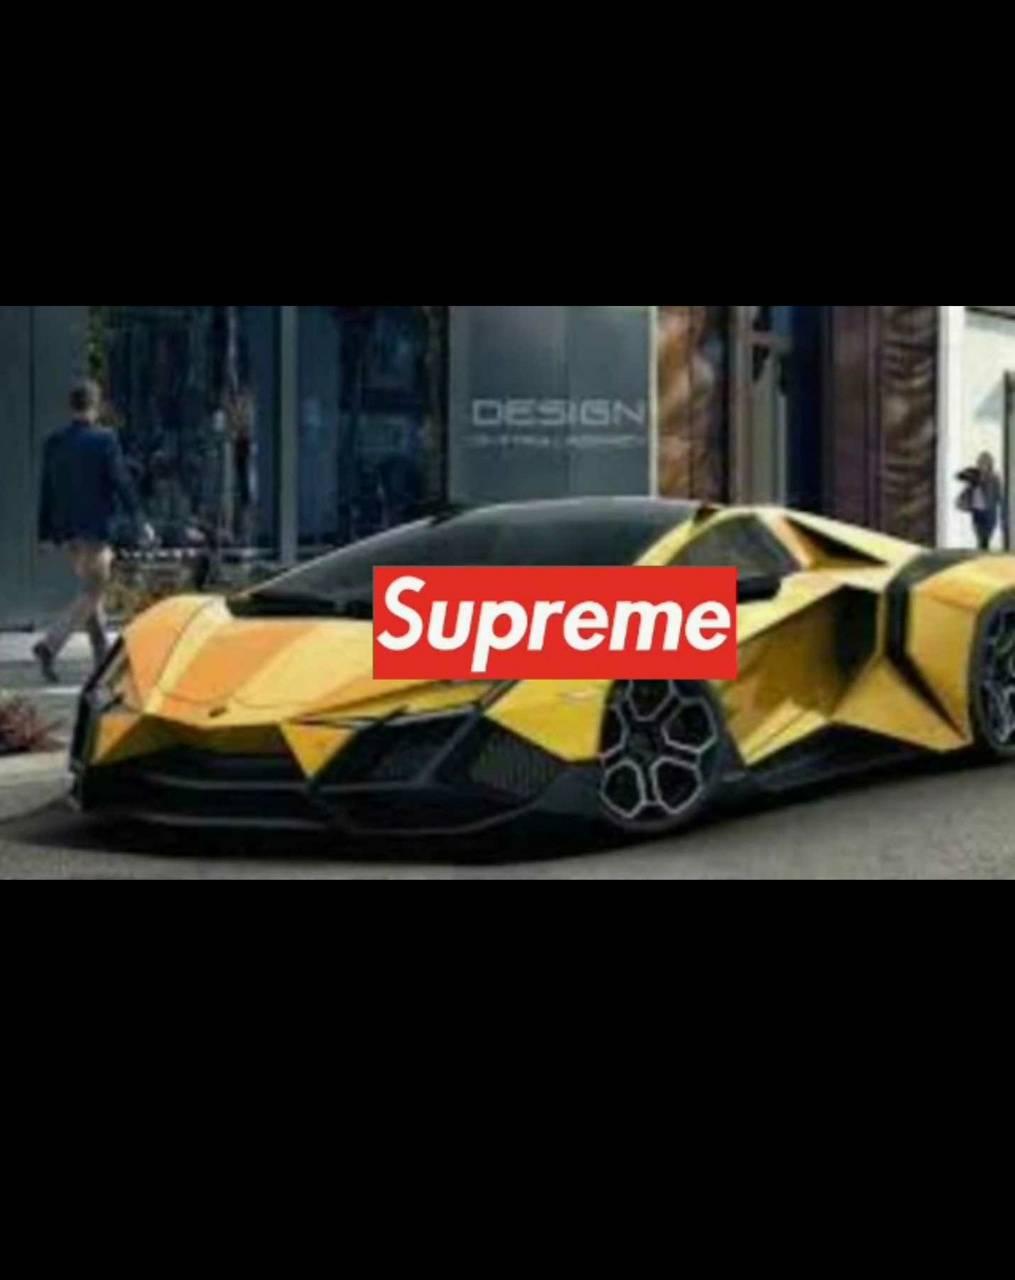 Supreme car wallpapers by Nathan_the_creator_9